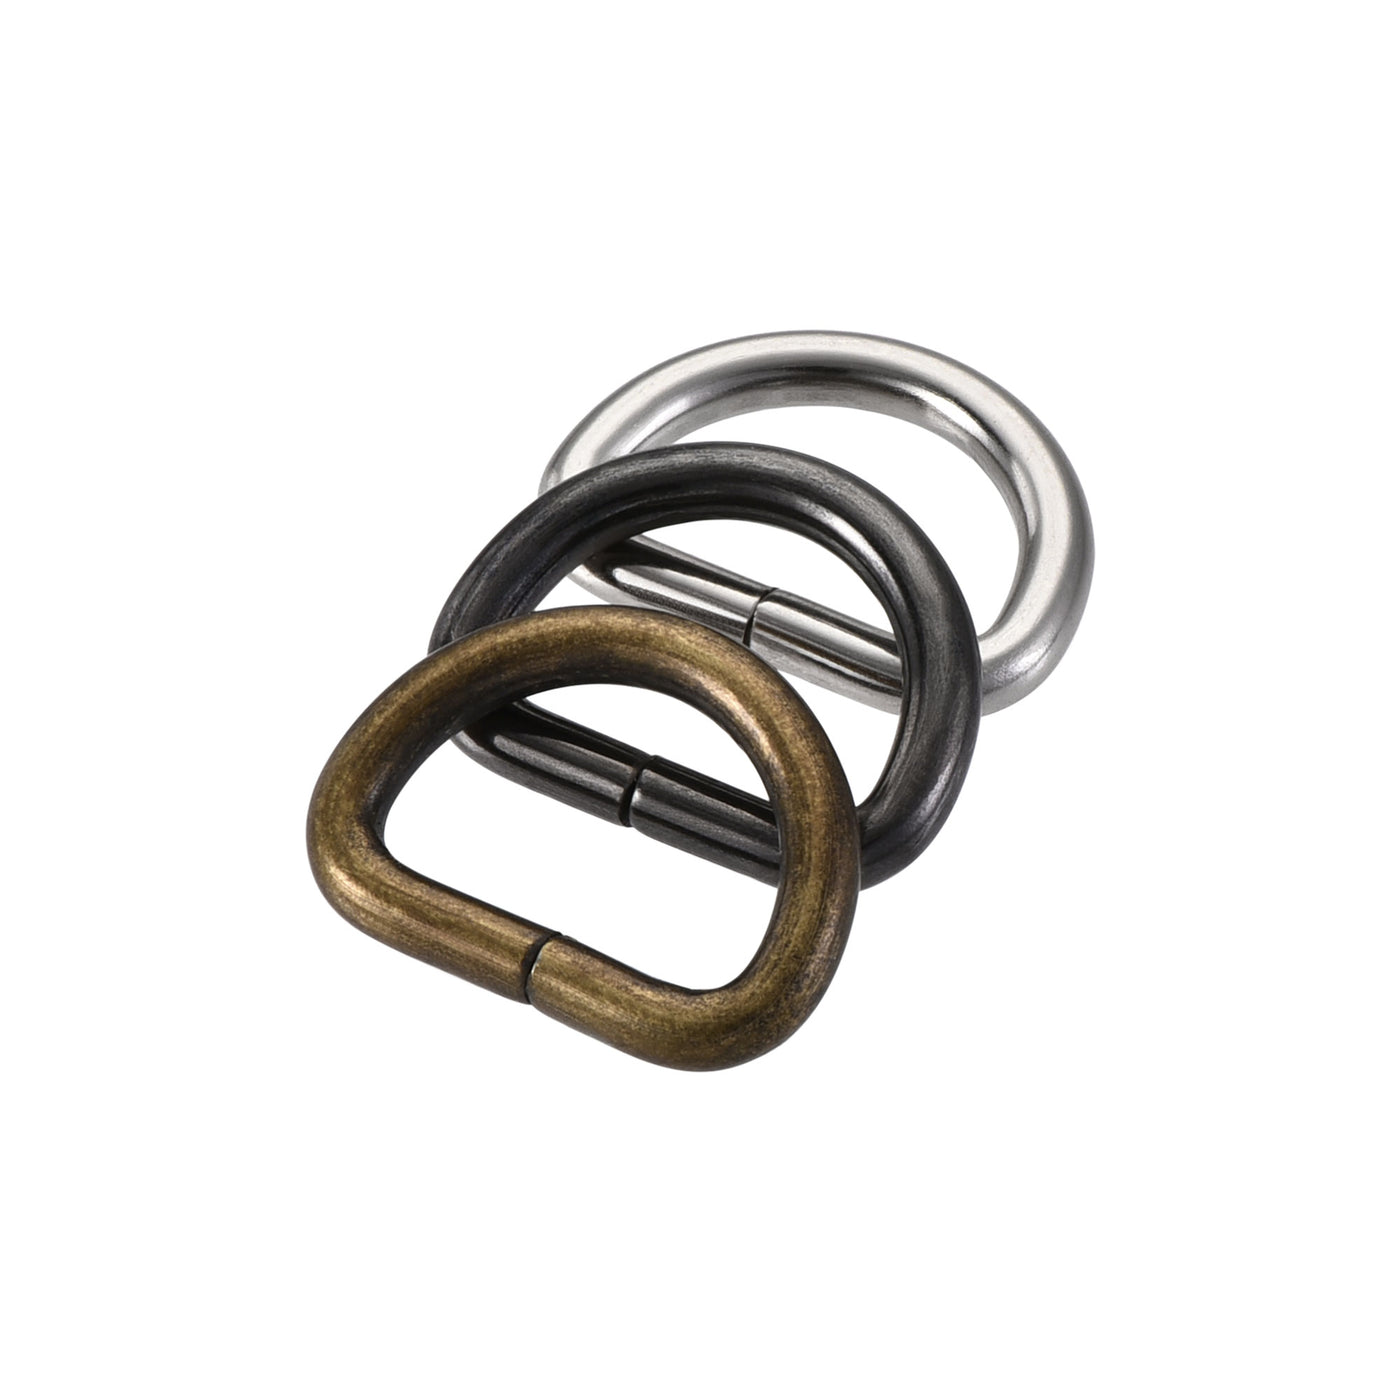 uxcell Uxcell Metal D Ring 0.79"(20mm) D-Rings Buckle Silver Tone, Bronze Tone, Black(Total 30pcs)